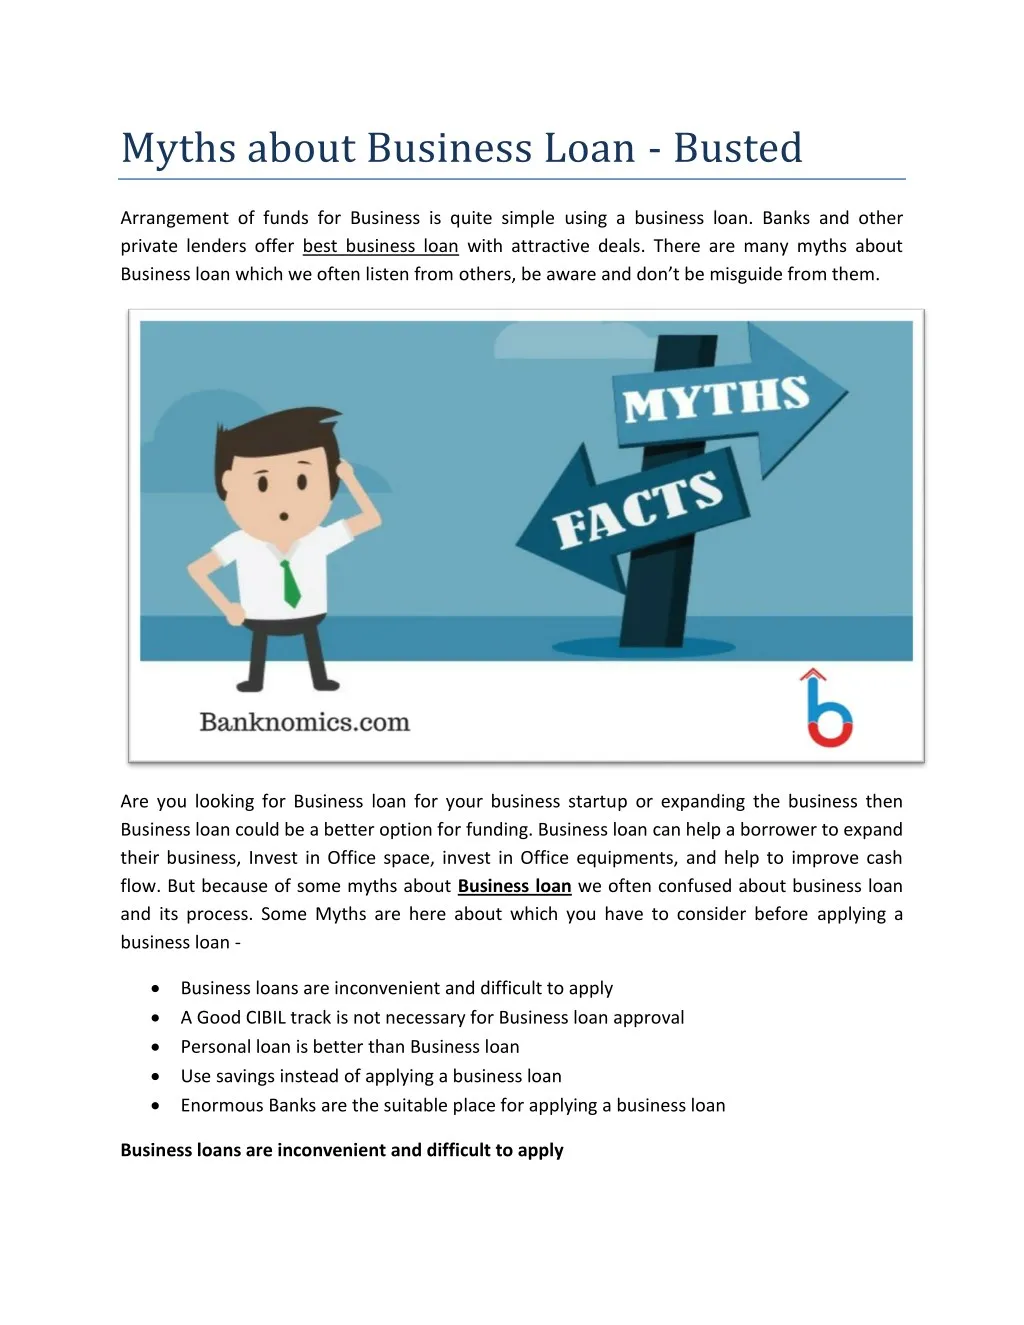 myths about business loan busted